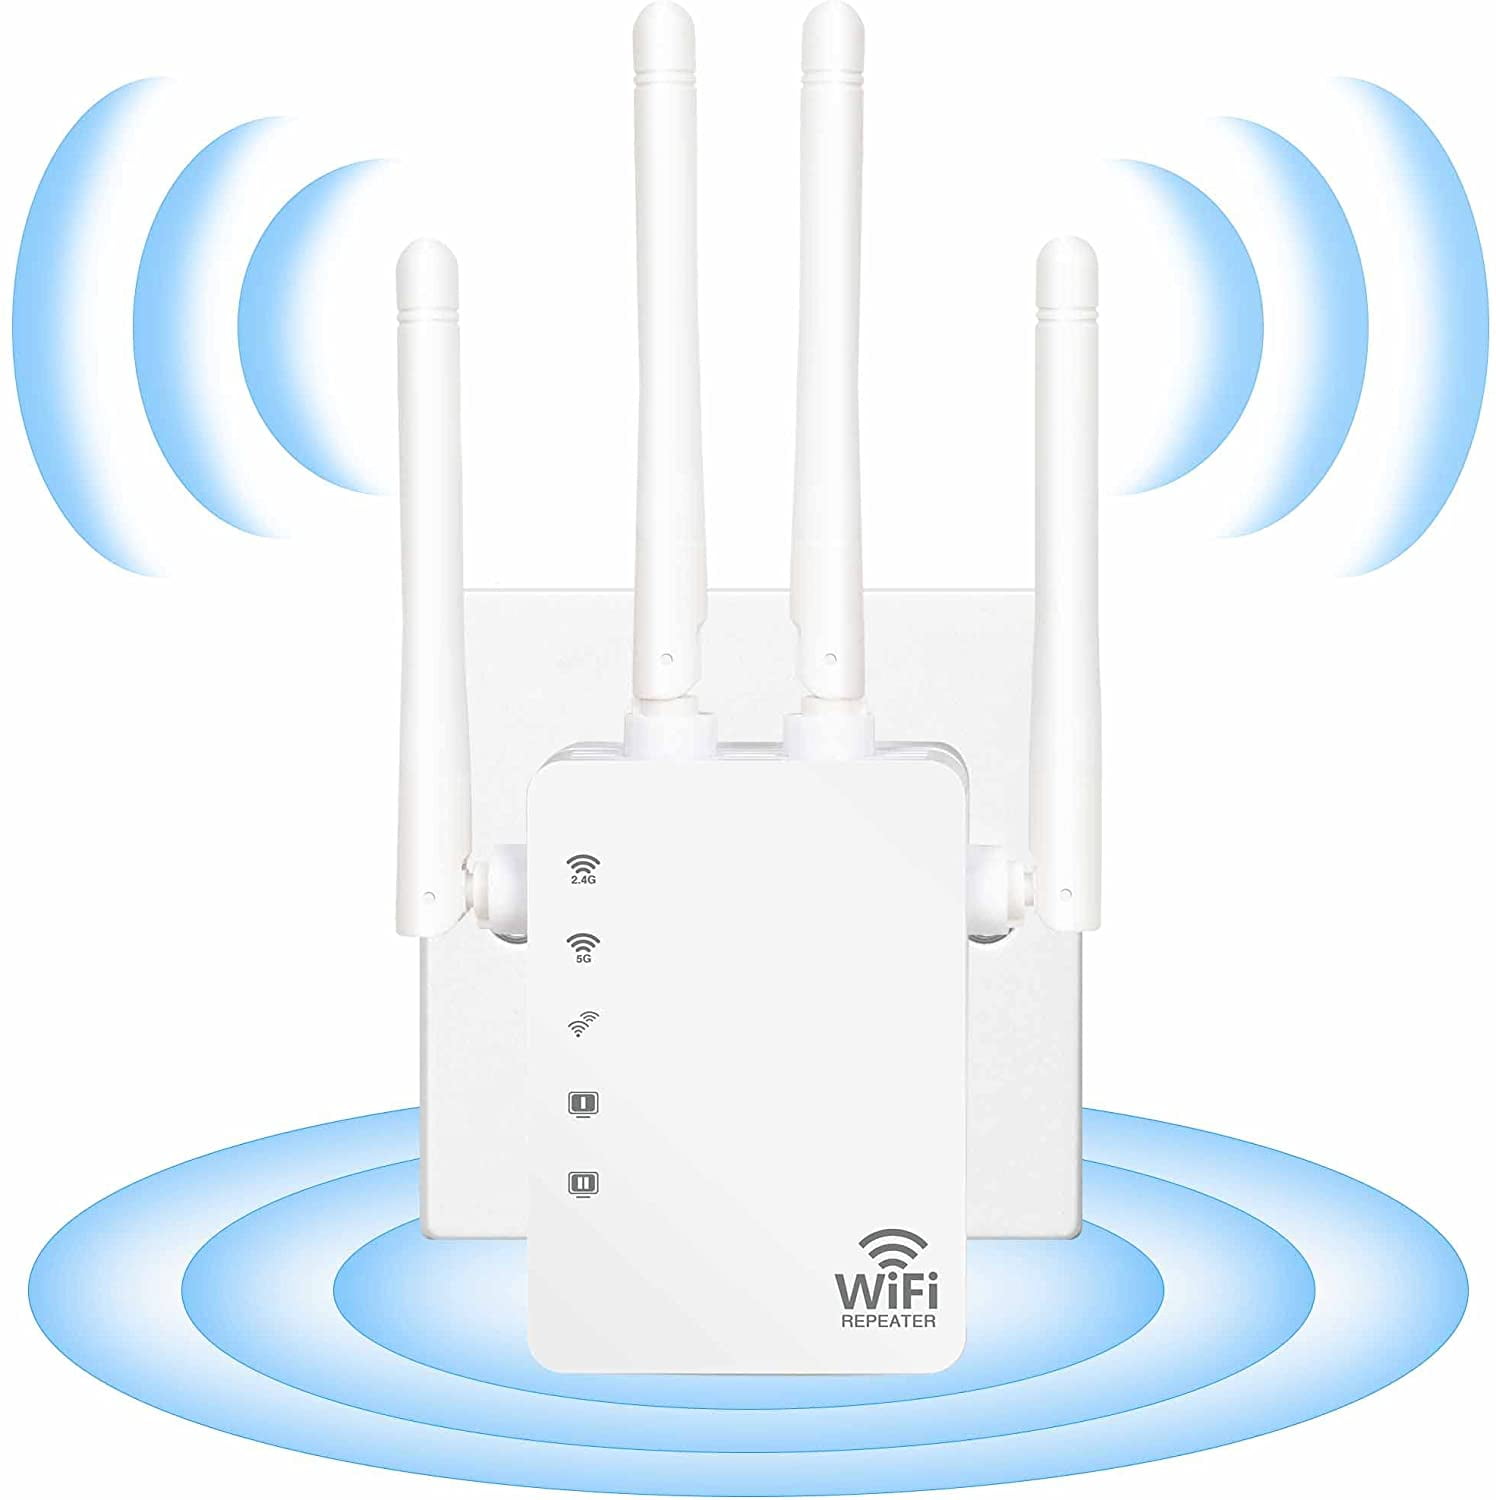 Wireless Signal Repeater Booster WiFi Range Extender 1200Mbps Dual Band 2.4G and 5G Signal Expander Extend WiFi Signal to Smart Home & Alexa Devices 4 Antennas Full Coverage 1200Mbps, White 